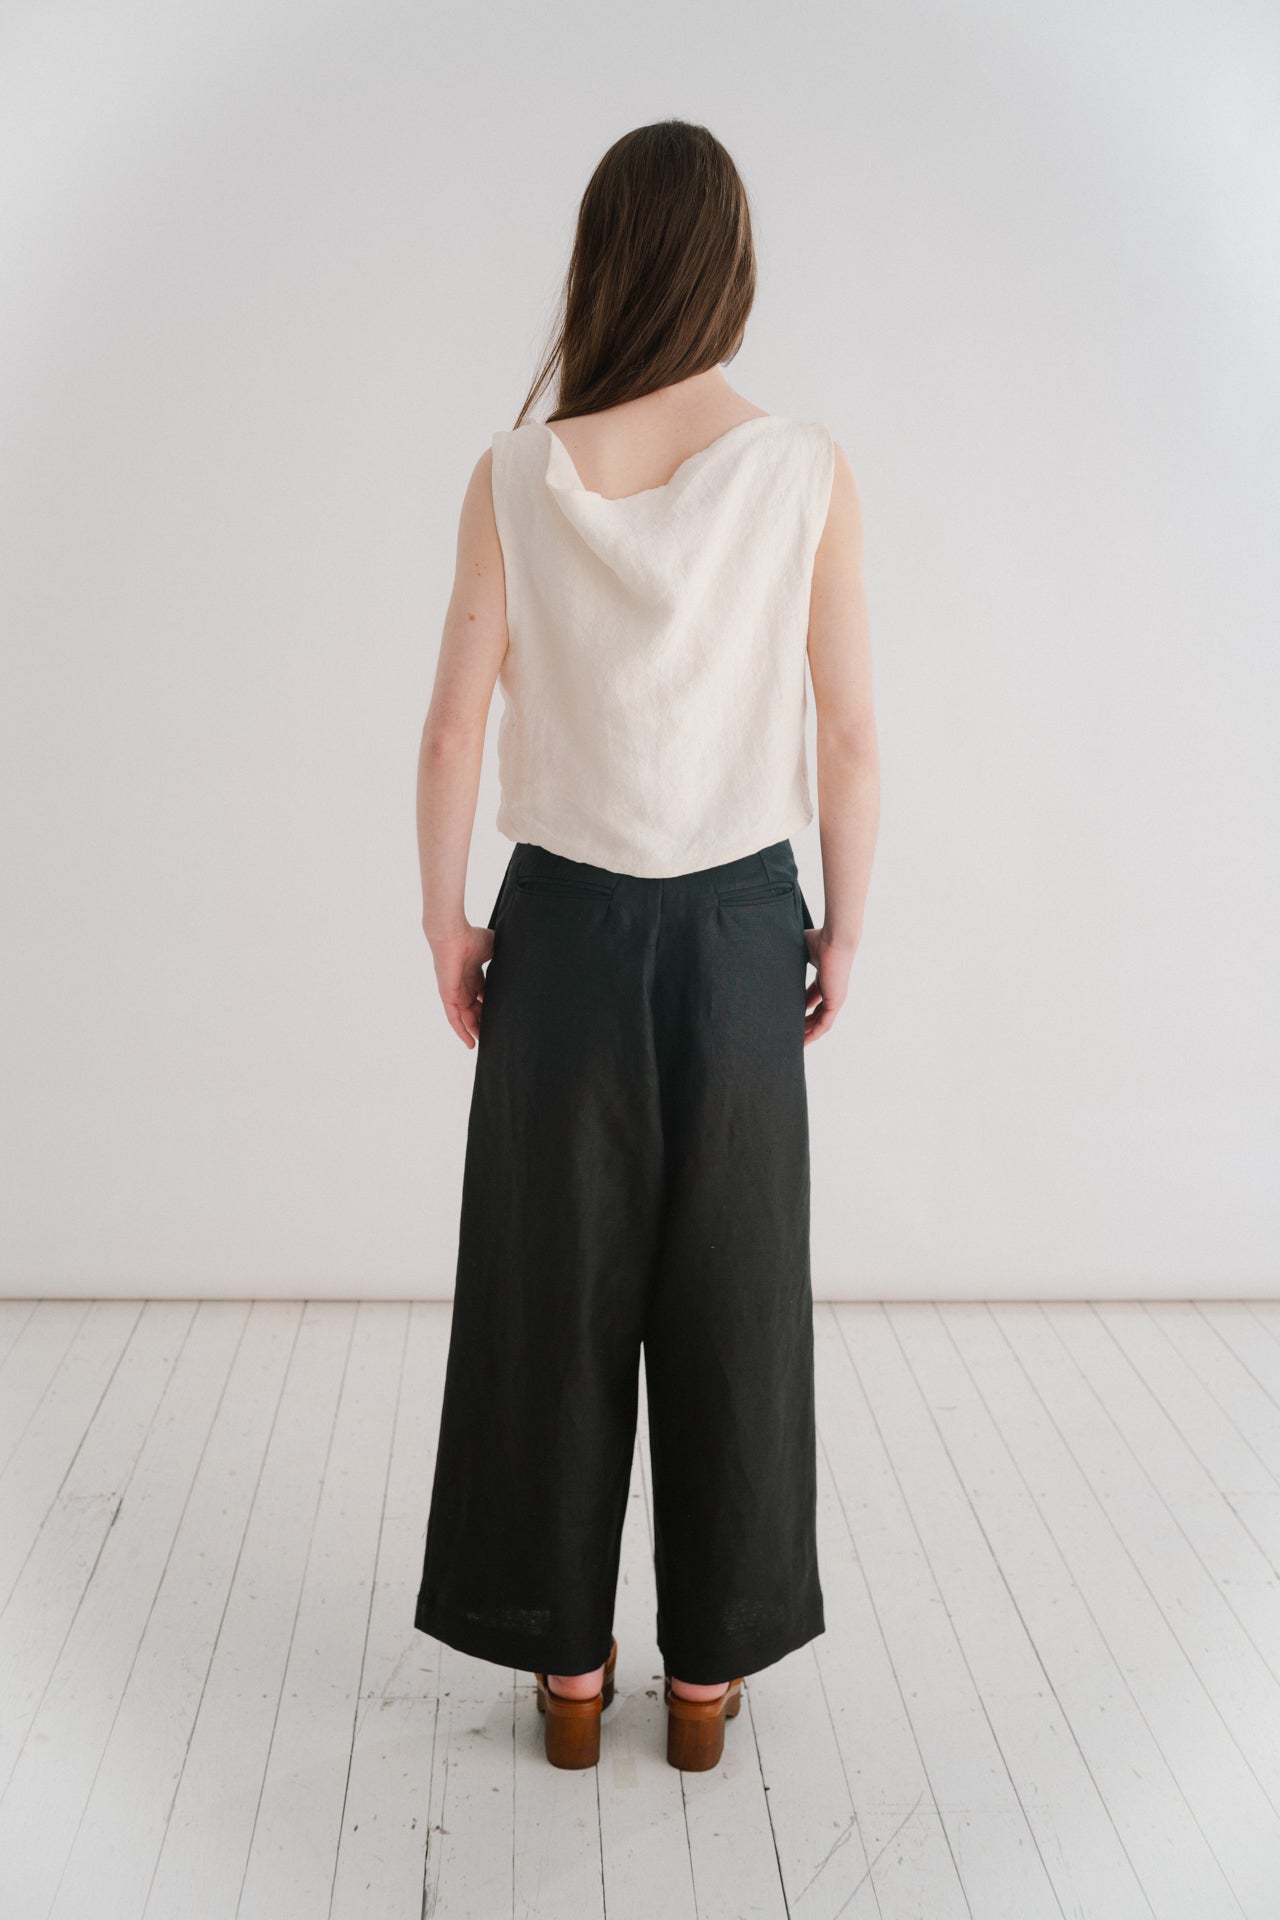 BOYFRIEND TROUSER - BLACK | The Boyfriend Trouser - a new, more tailored piece for SS24. Cut with a dropped crotch and wide leg. Contrasted with a smart waistband and pleat detail, these are so wearable yet will make you feel really put together. They pai